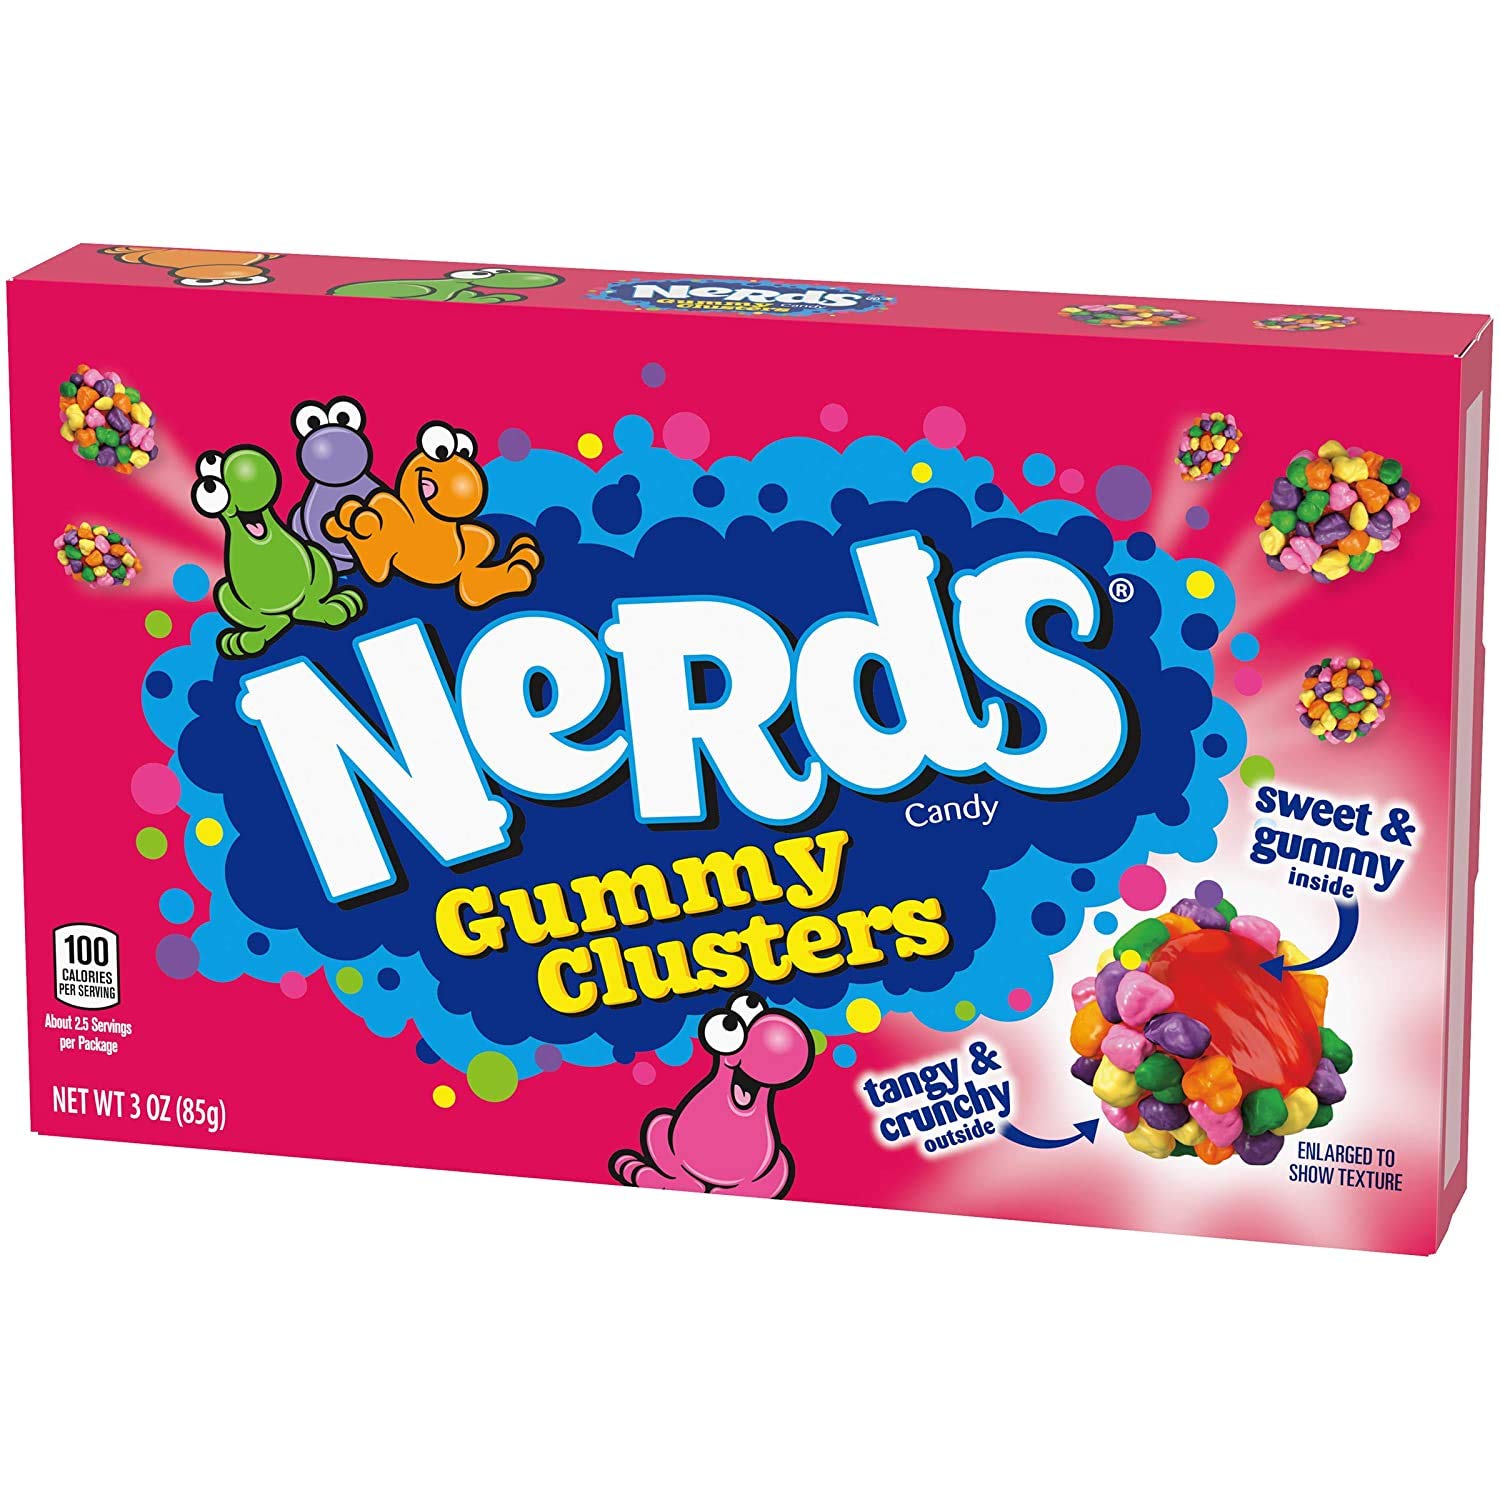 Nerds Clusters Theater Box 3Oz